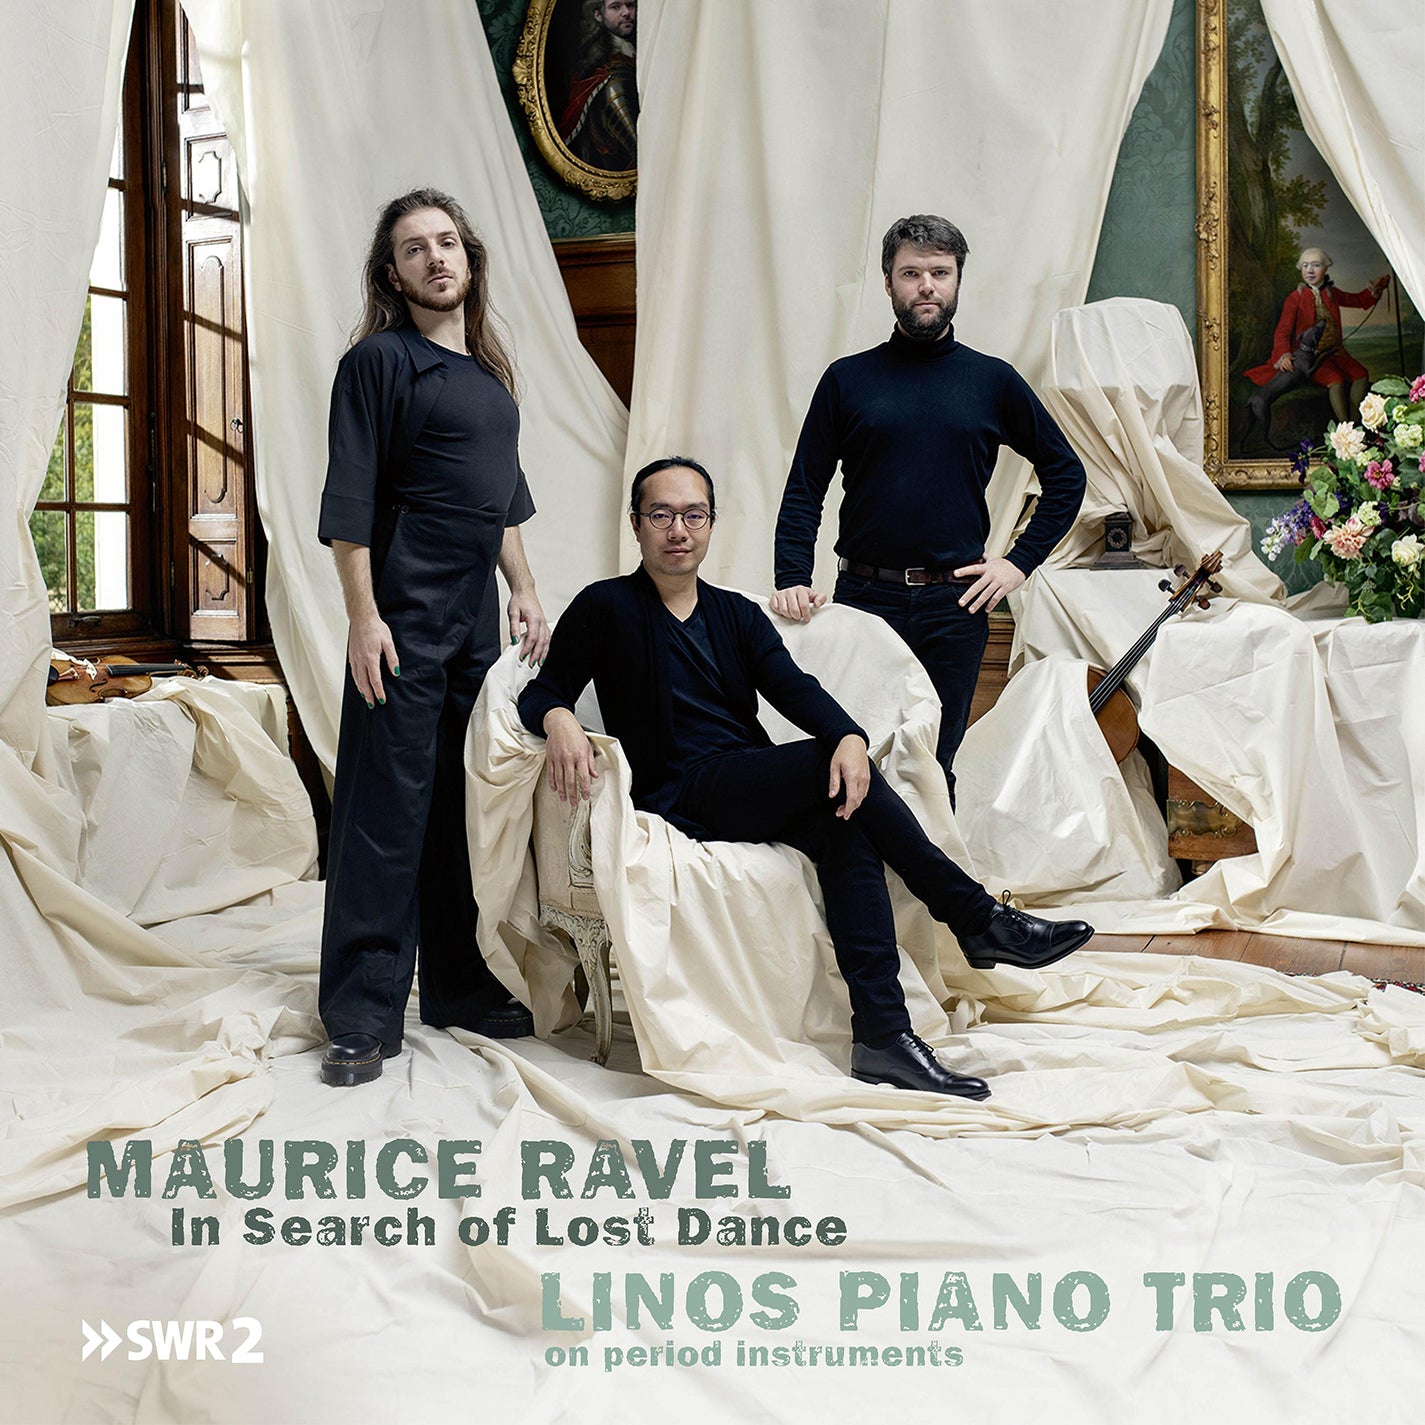 Ravel: In Search of Lost Dance - Ravel on Period Instruments / Linos Piano Trio